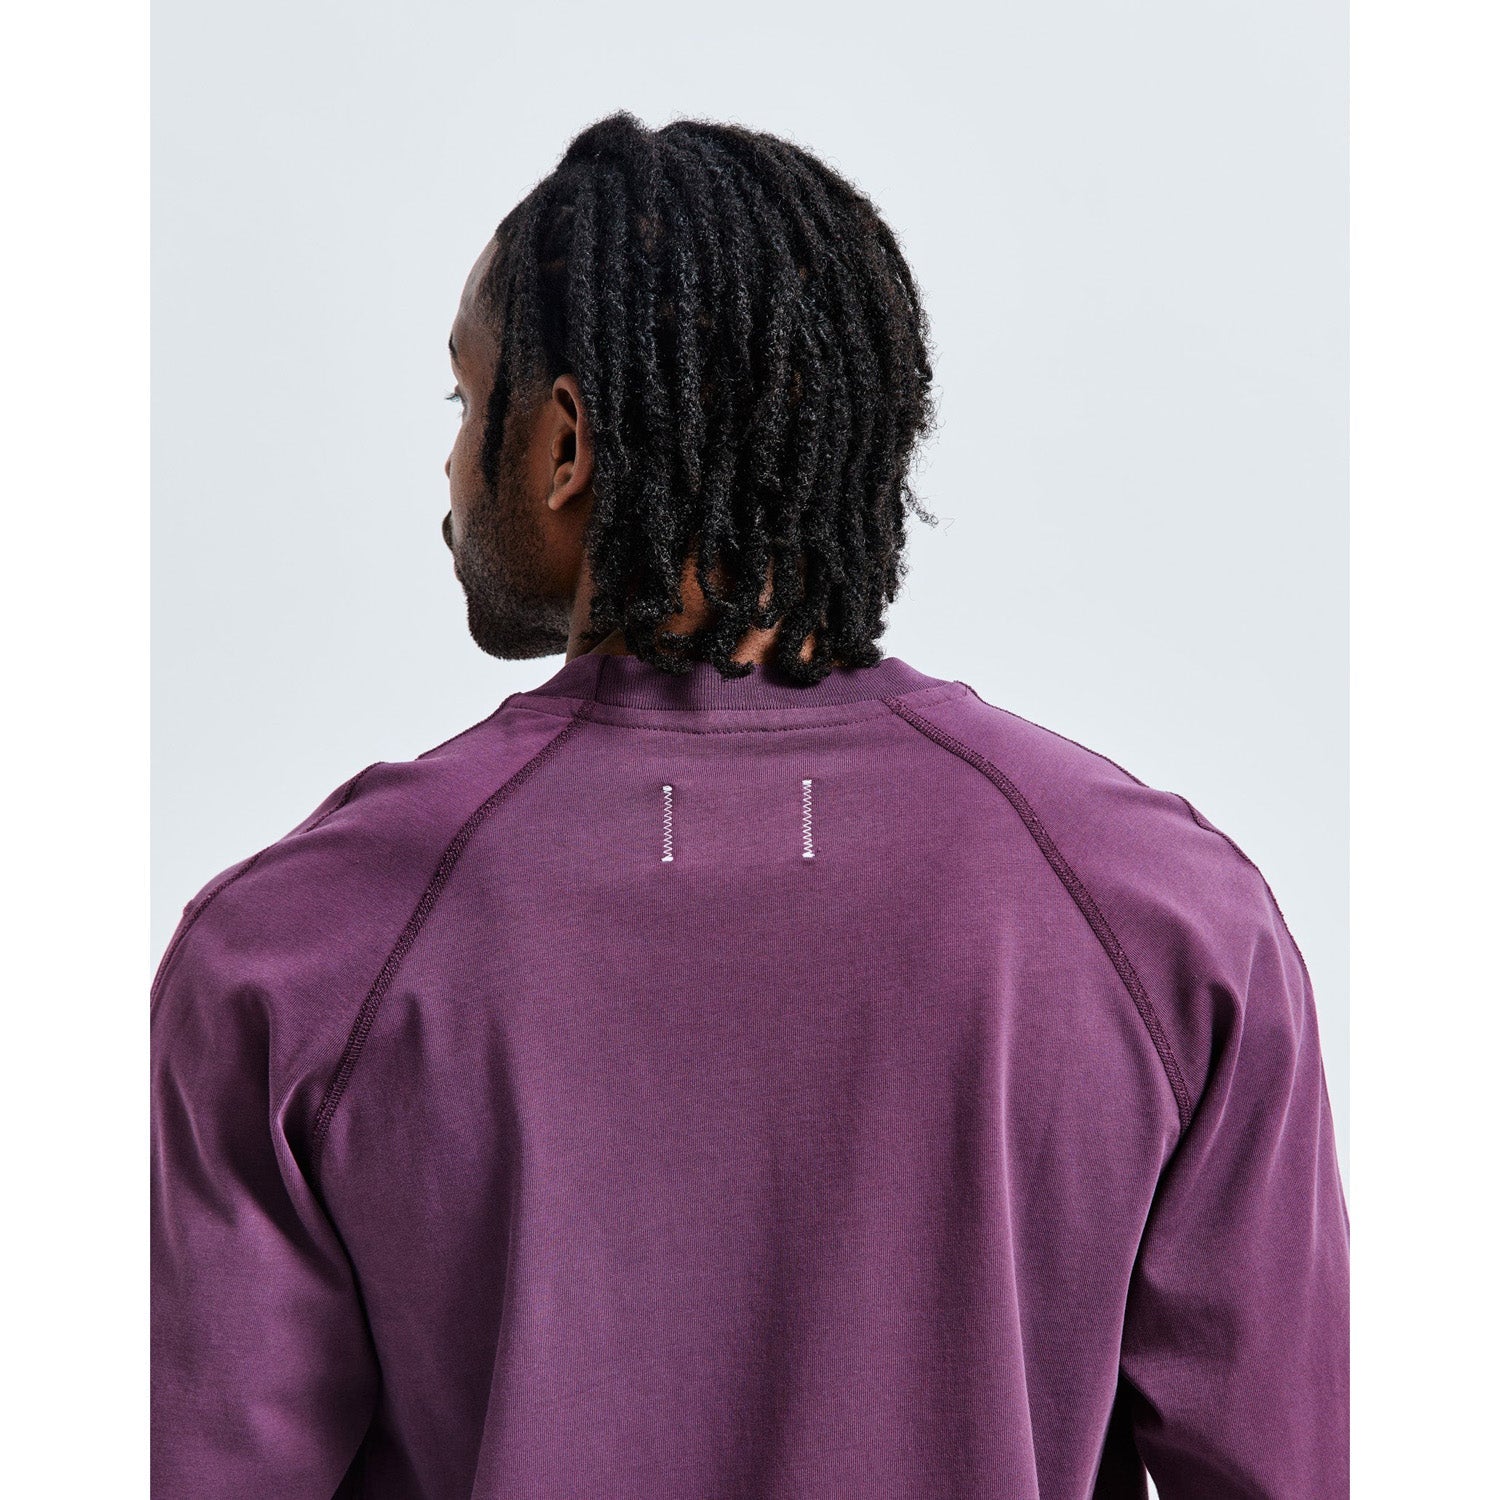 Reigning Champ Mid Wt Jersey Long Sleeve Aubergine RC-2222-AUB - T-SHIRTS - Canada